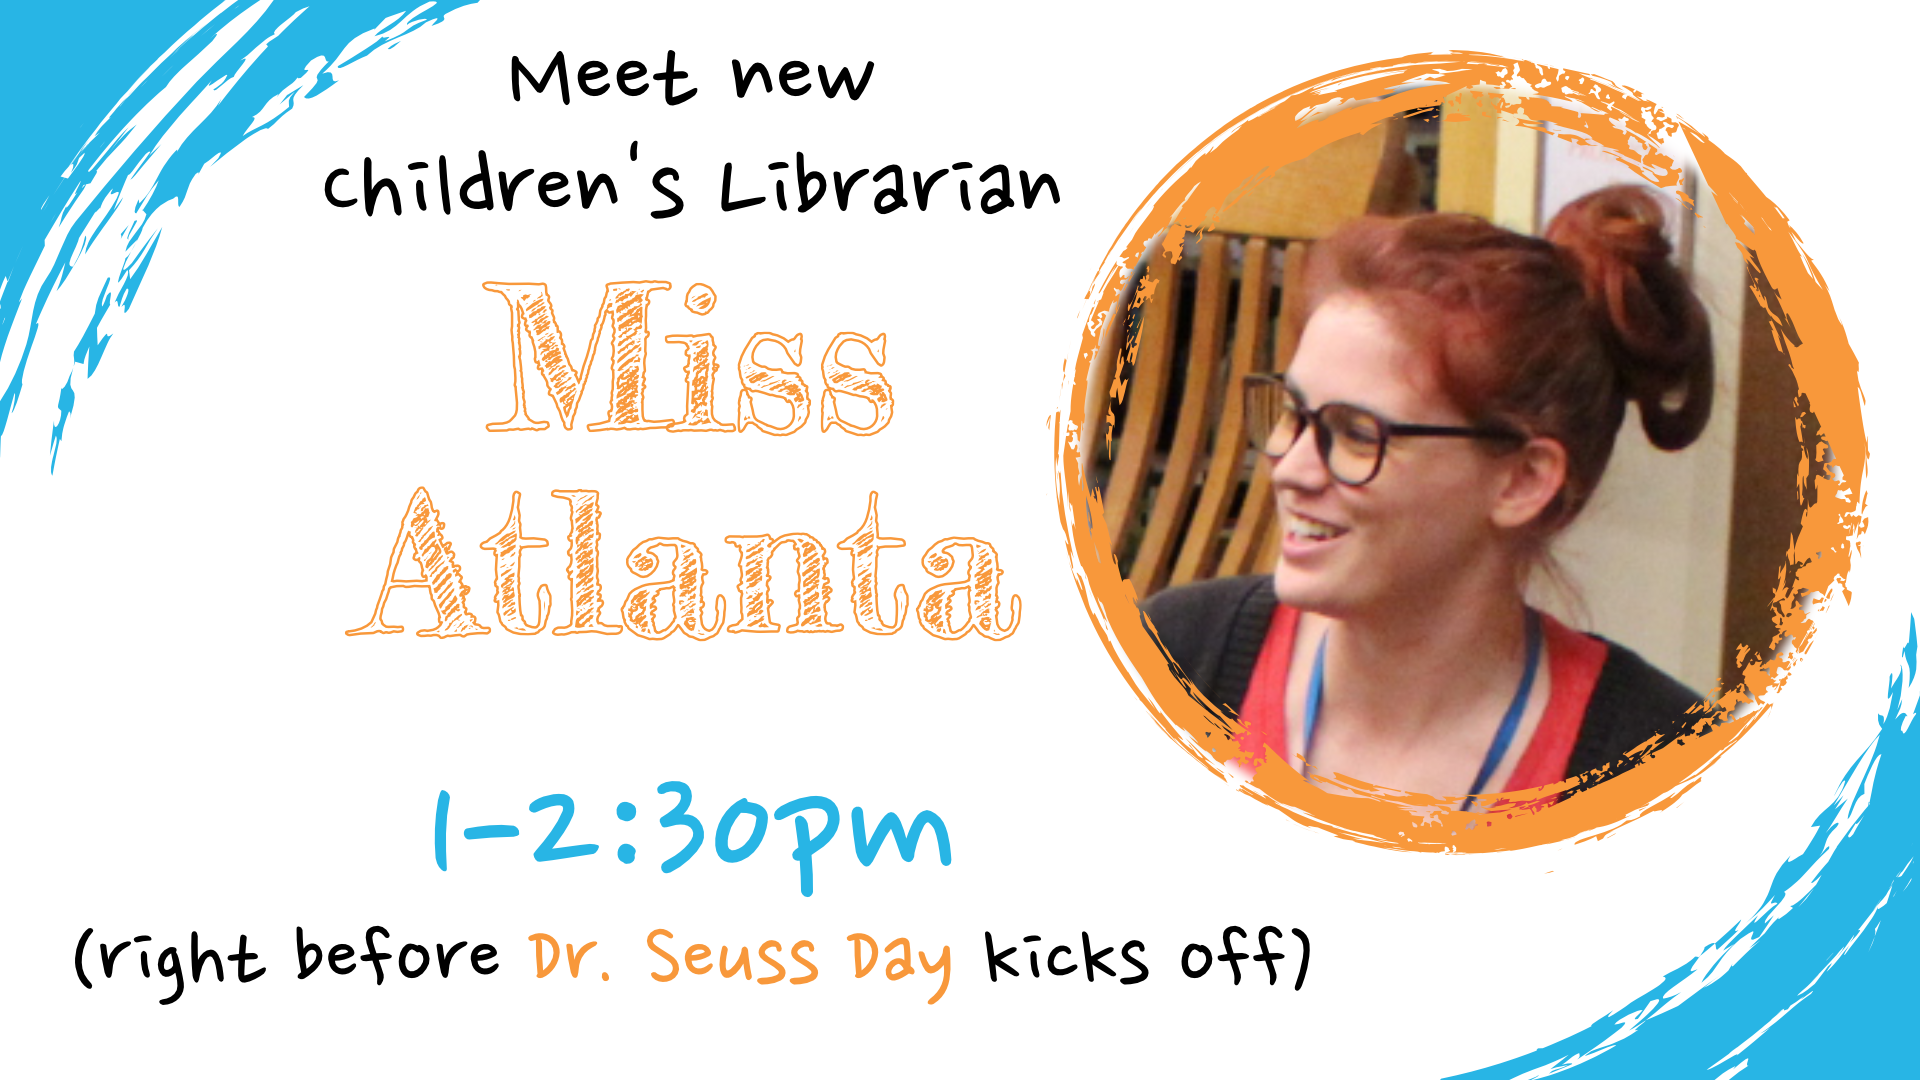 Meet and greet with new Children's Librarian Atlanta, March 2nd at 1pm, right before Dr. Seuss Day kicks off